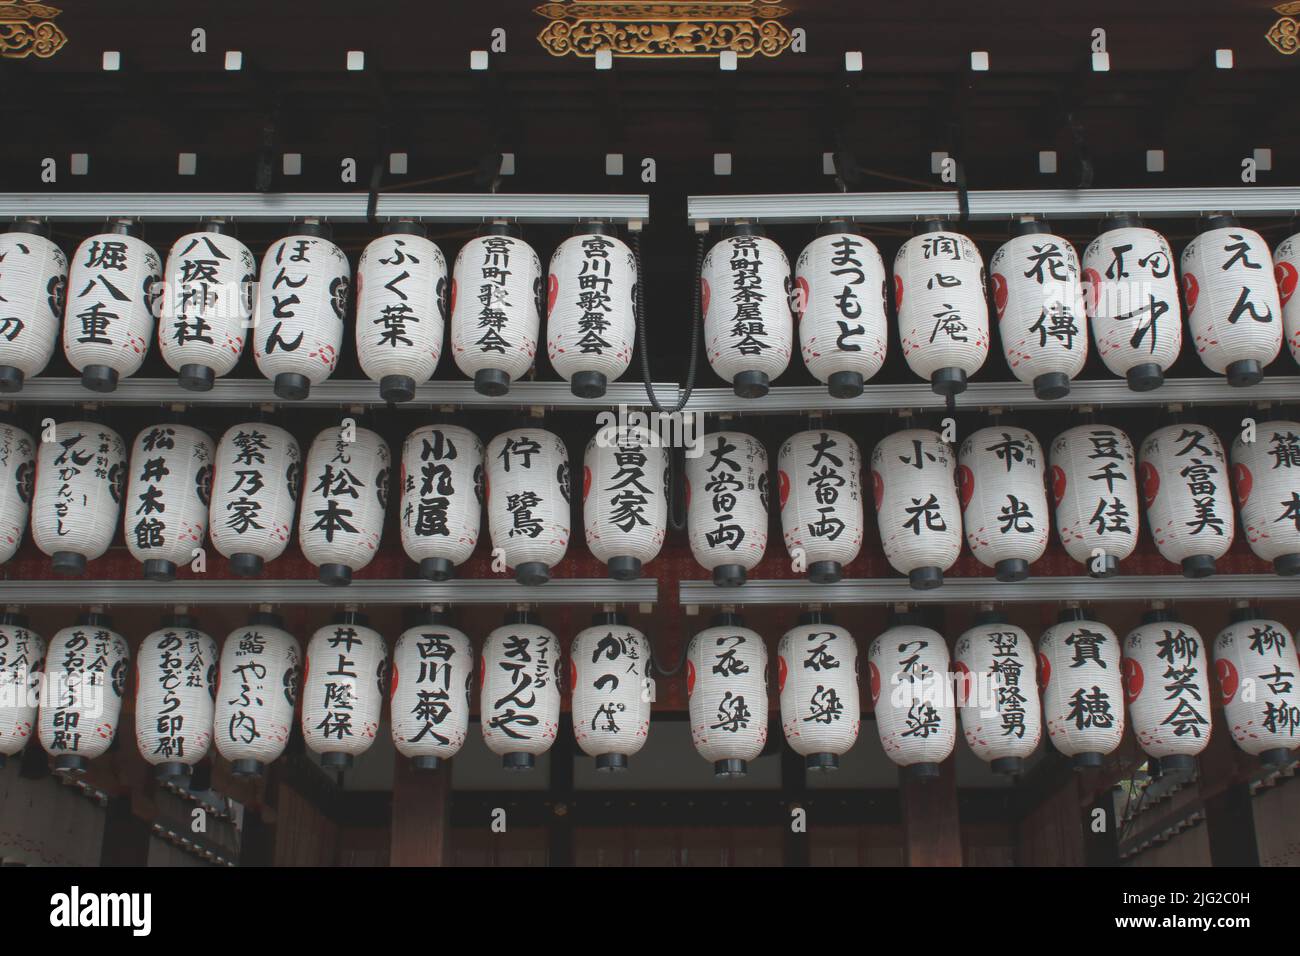 Rows of lanterns hanging in a japanese temple in Kyoto, Japan Stock Photo